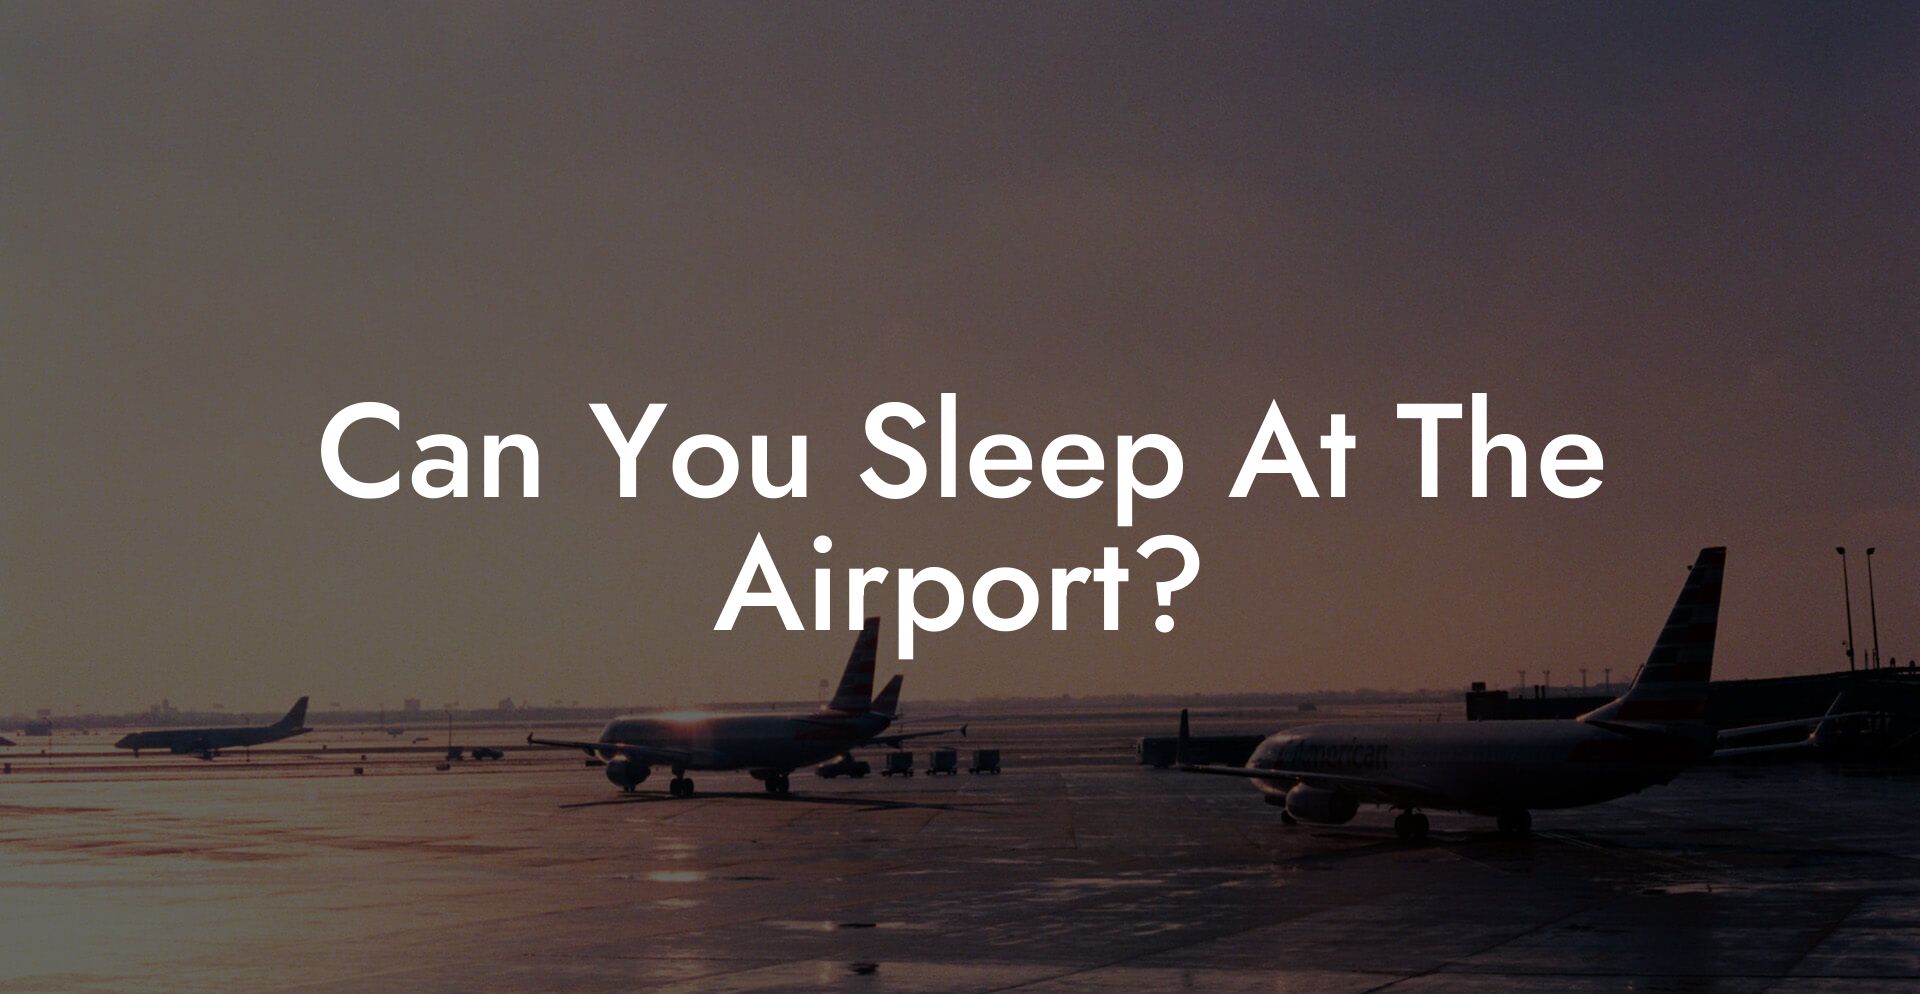 Can You Sleep At The Airport?